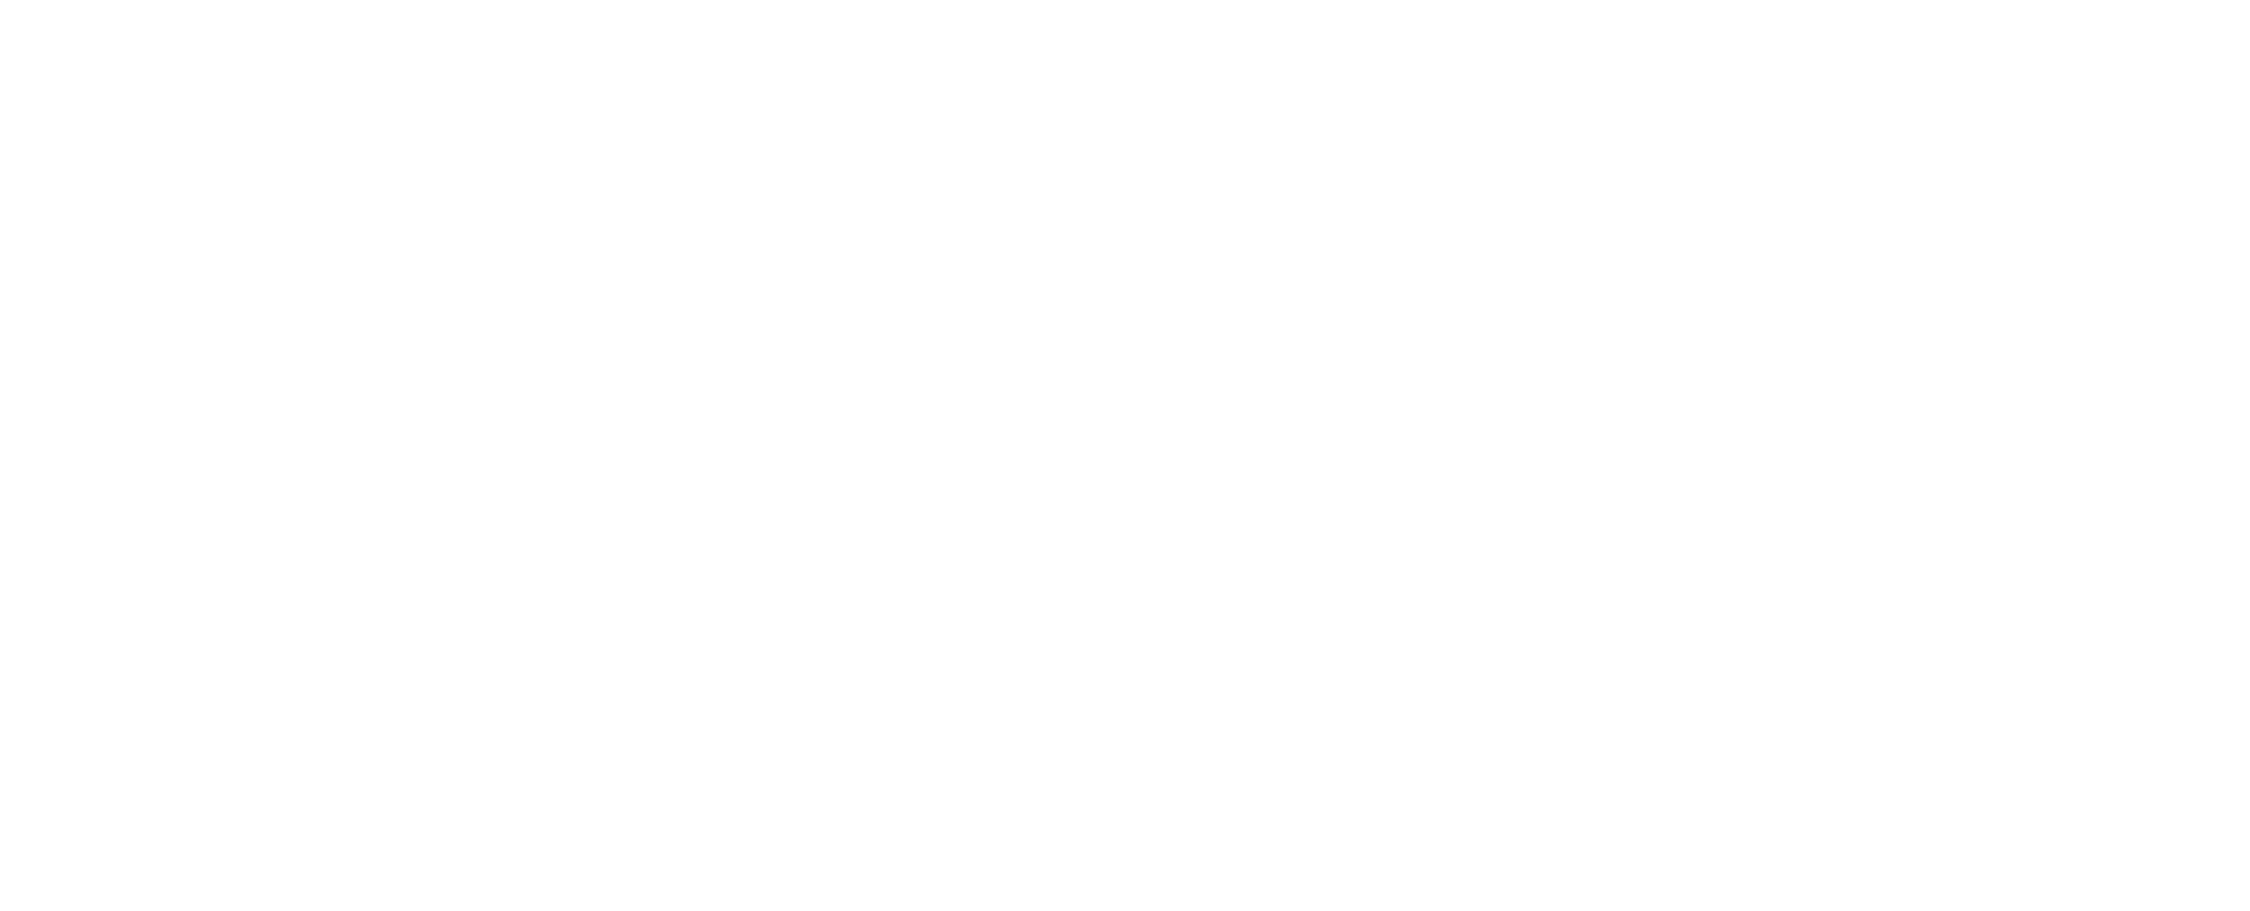 Rochester community and technical college logo